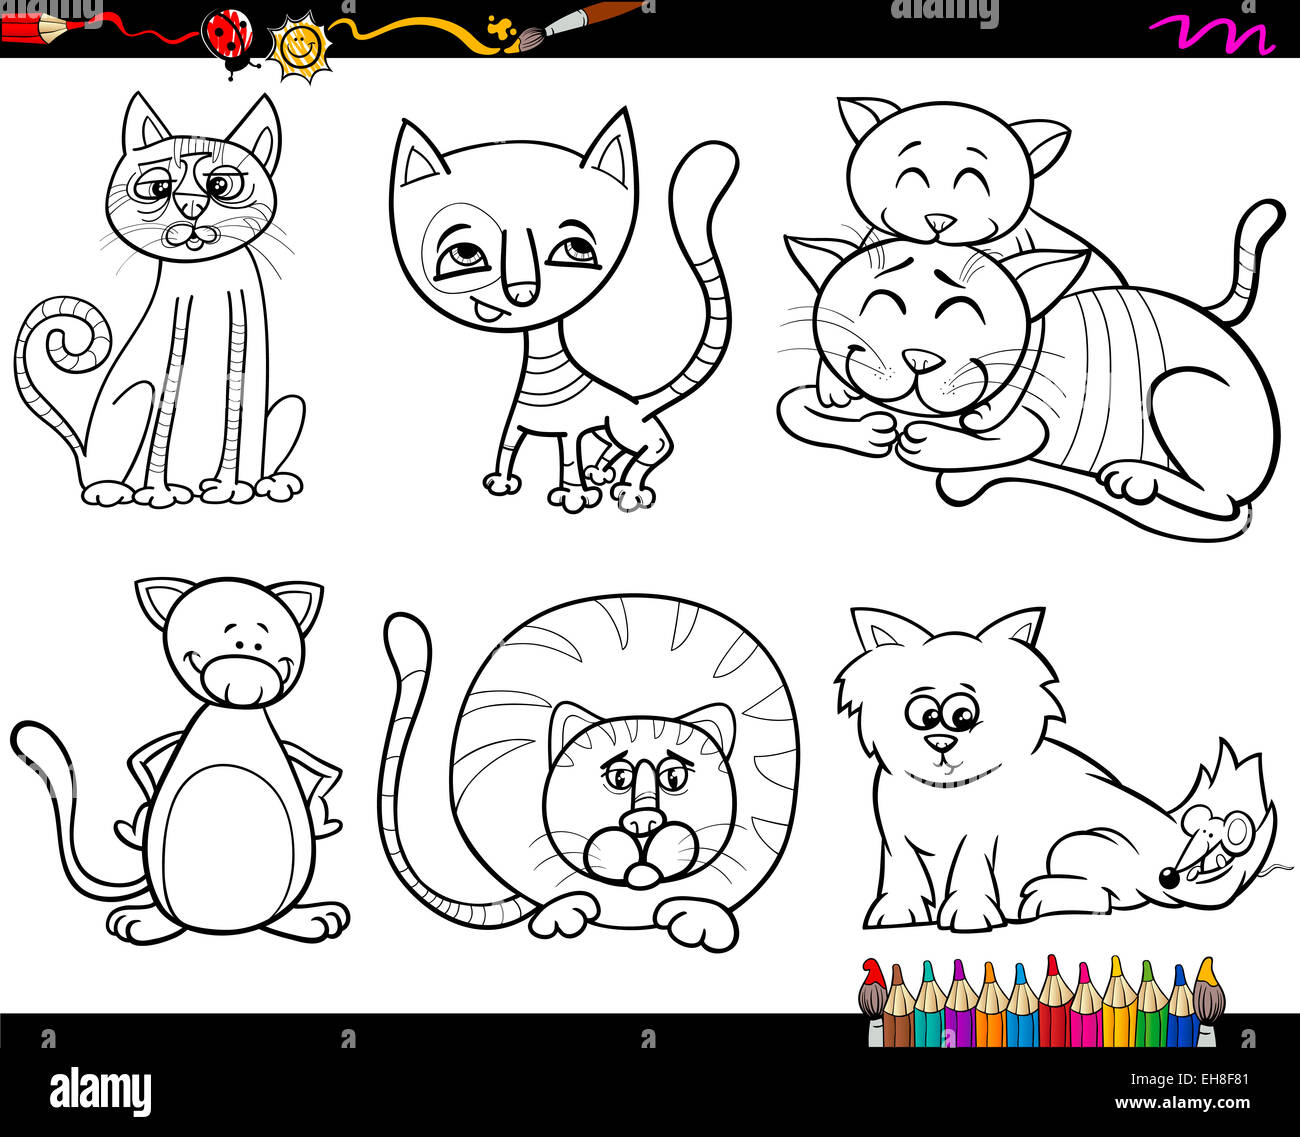 Coloring Book Cartoon Illustration of Funny Cats Characters Set Stock Photo